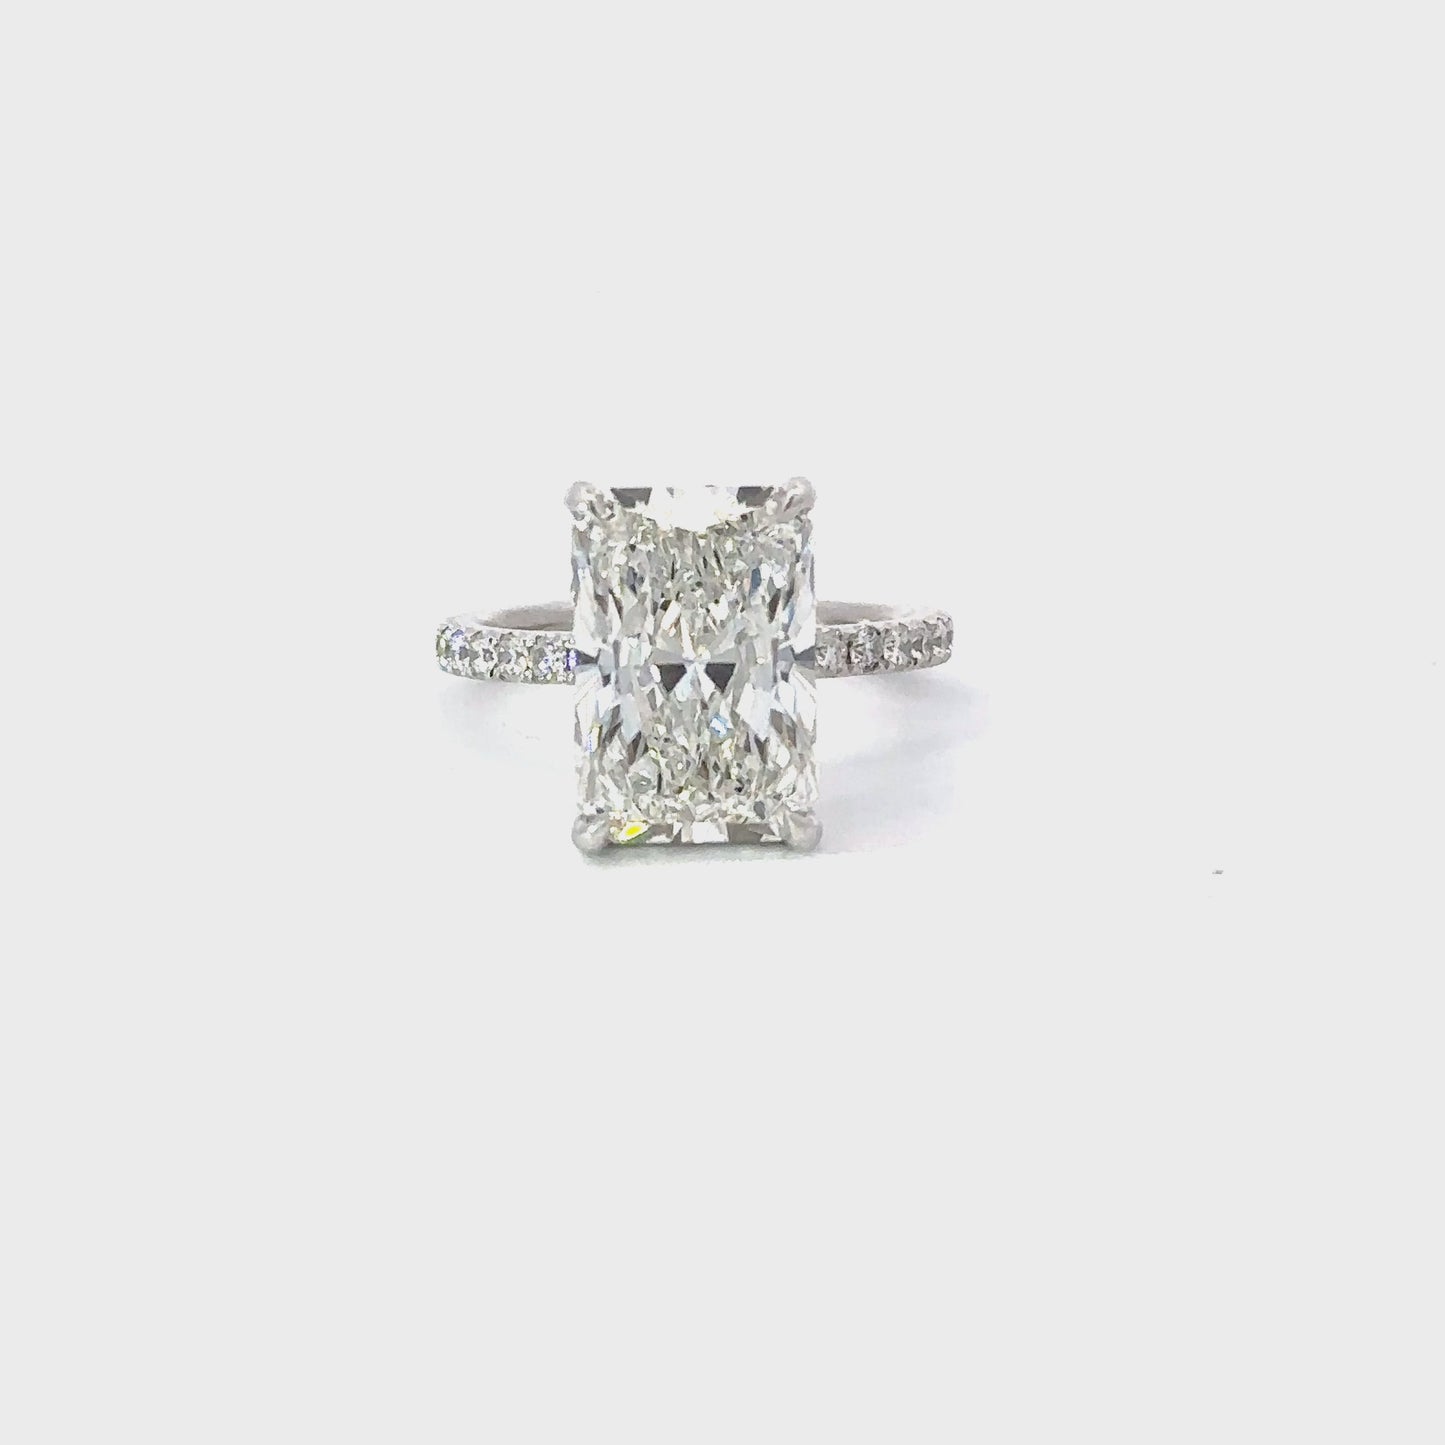 5.16 Carat Lab Created Radiant Engagement Ring with Signature Setting